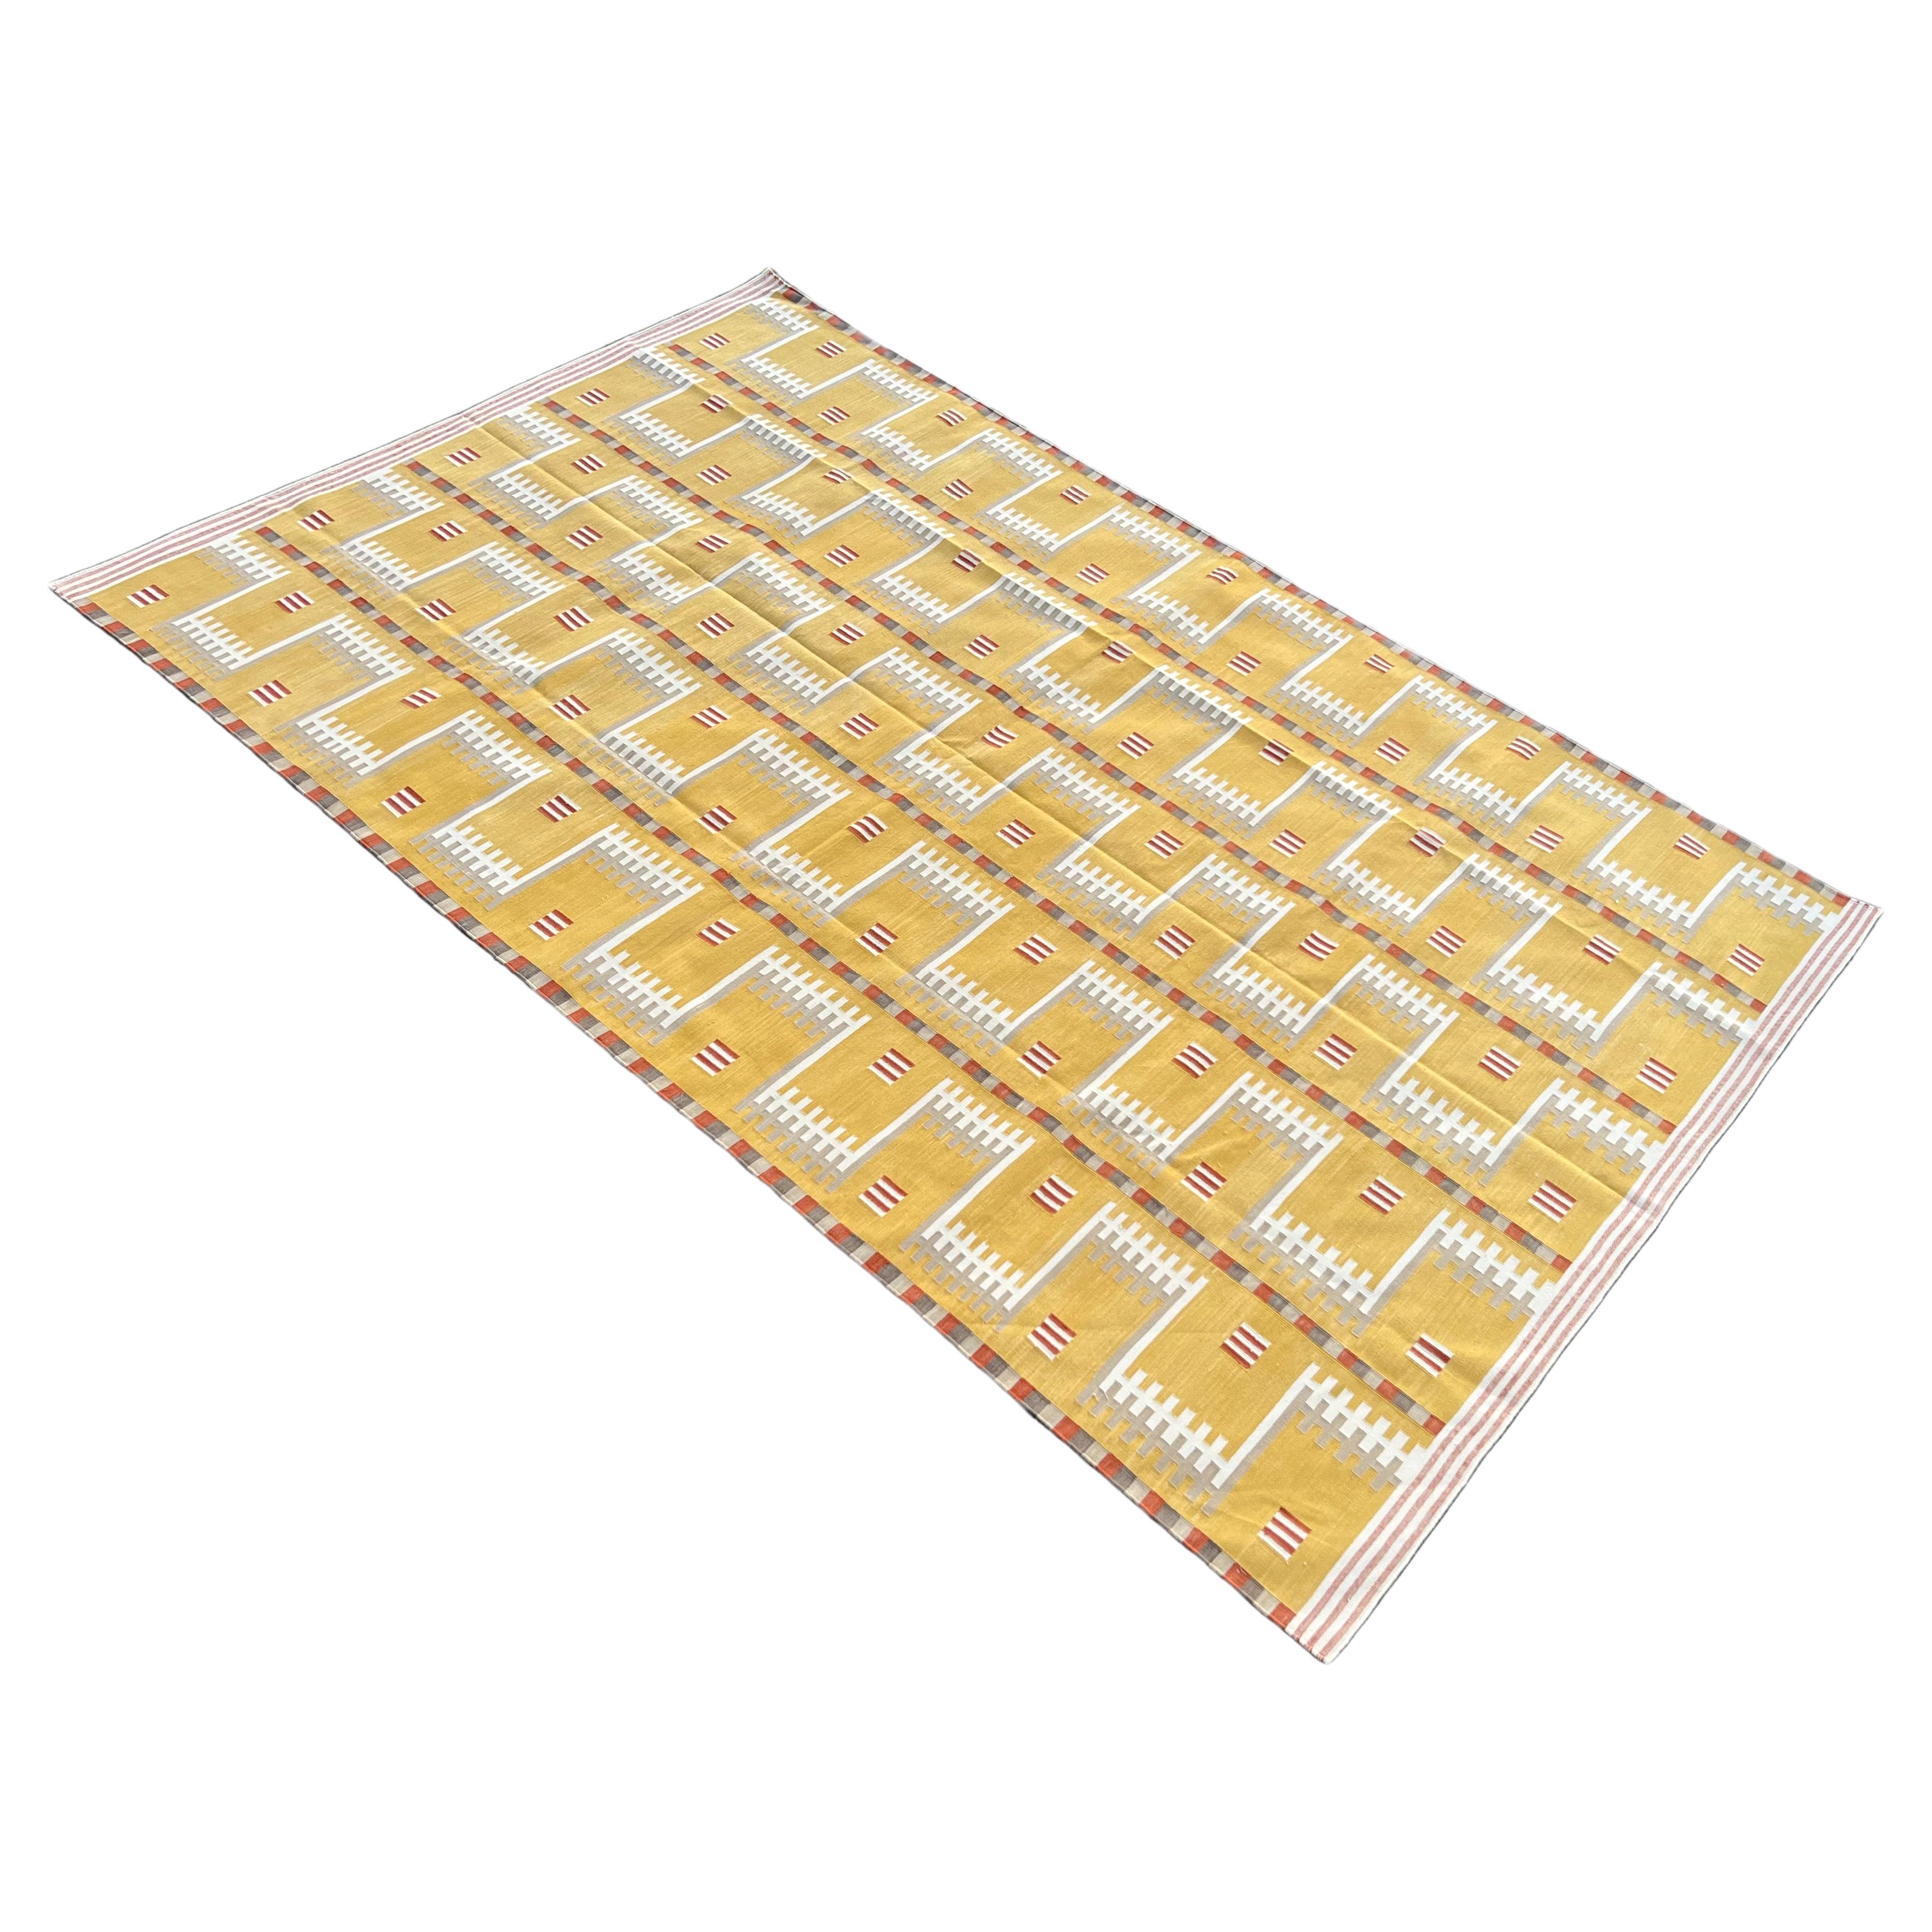 Cotton Natural Vegetable Dyed, Mustard, Cream & Beige Geometric Indian Dhurrie-8'x10'
These special flat-weave dhurries are hand-woven with 15 ply 100% cotton yarn. Due to the special manufacturing techniques used to create our rugs, the size and